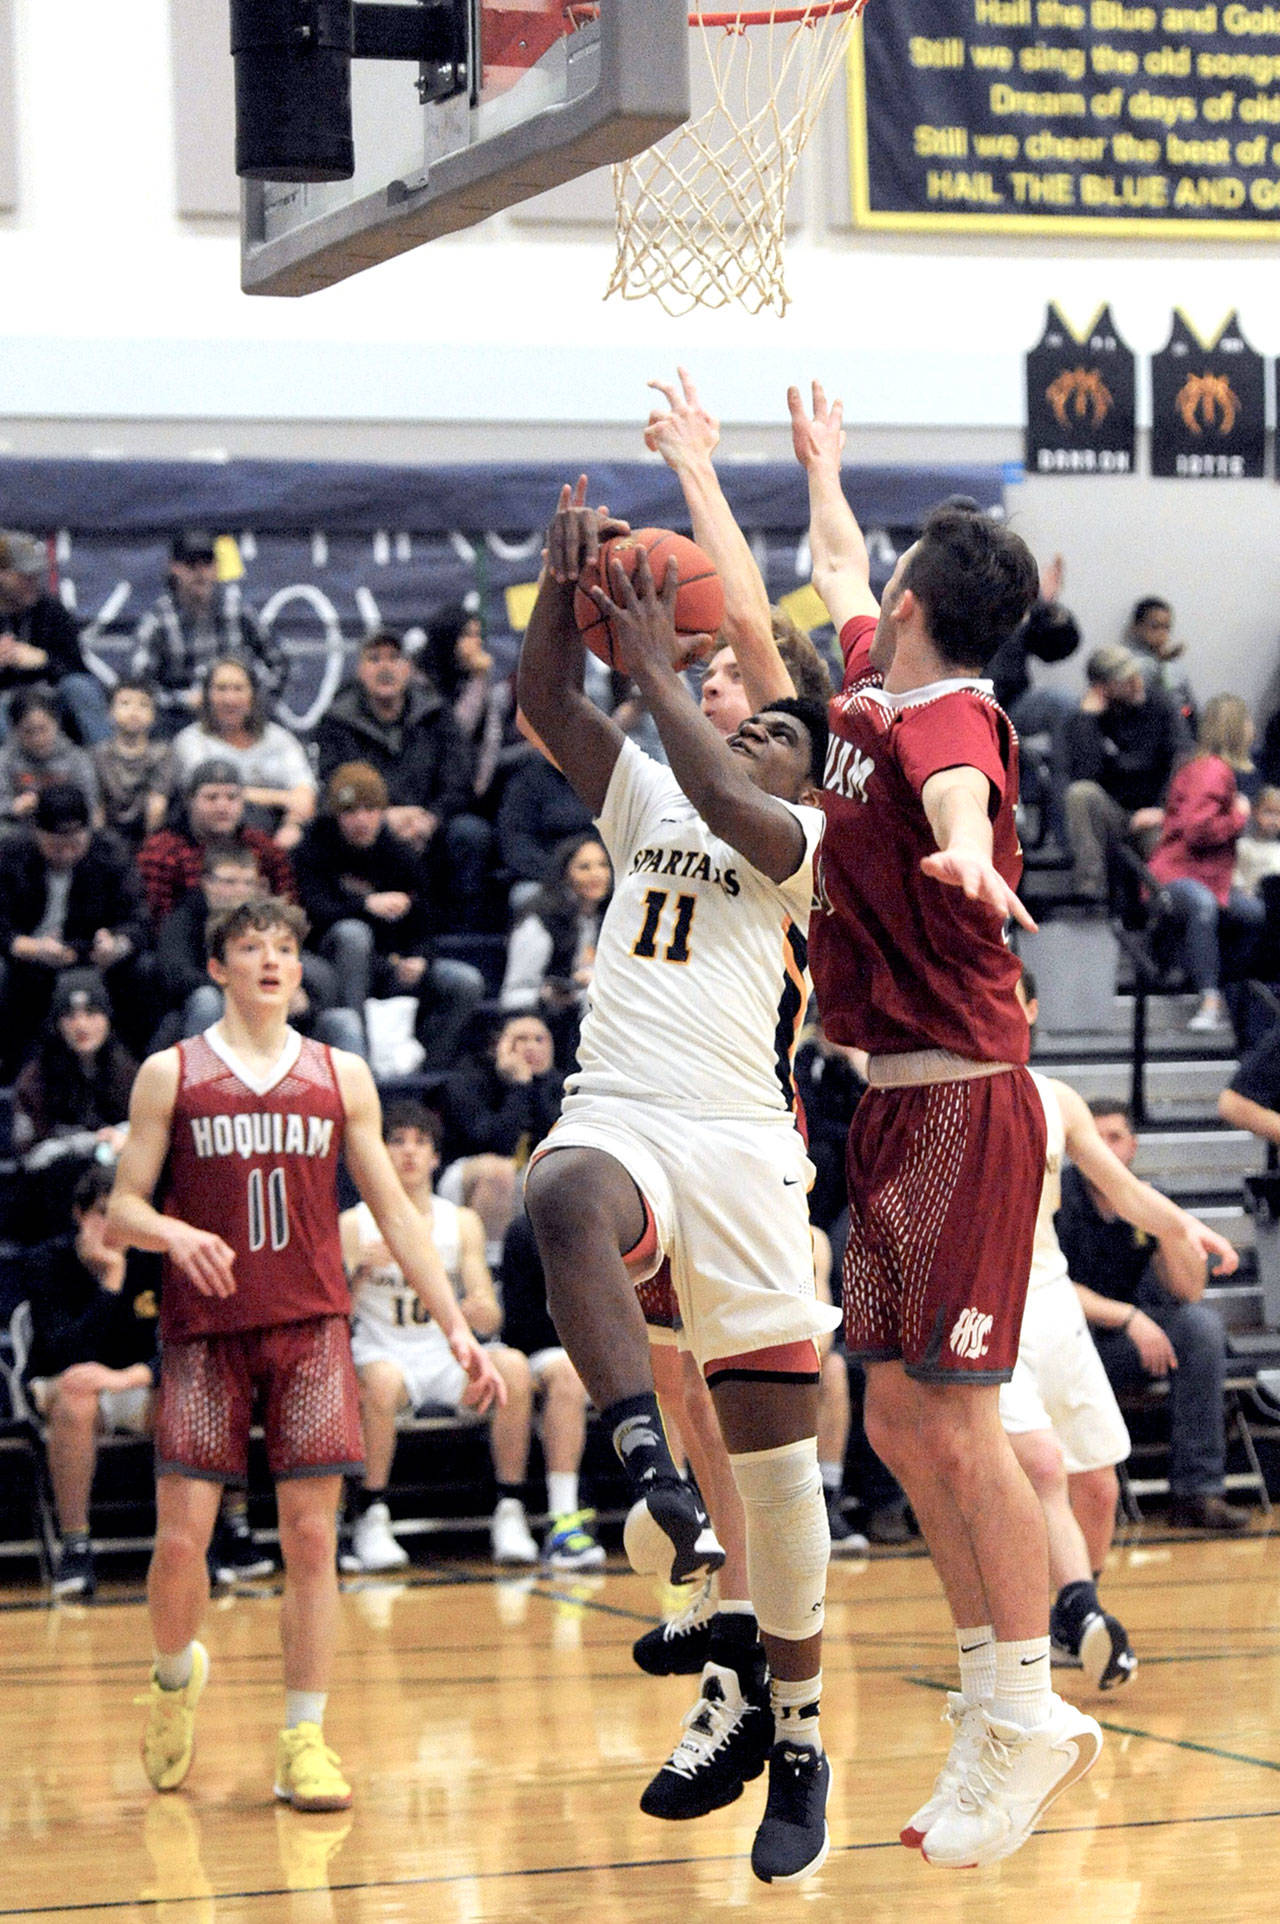 Forks’ Trey Baysinger powers his way to the basket among Hoquiam defenders Tuesday in Forks. The Spartans beat the Grizzlies 71-57. (Lonnie Archibald/for Peninsula Daily News)